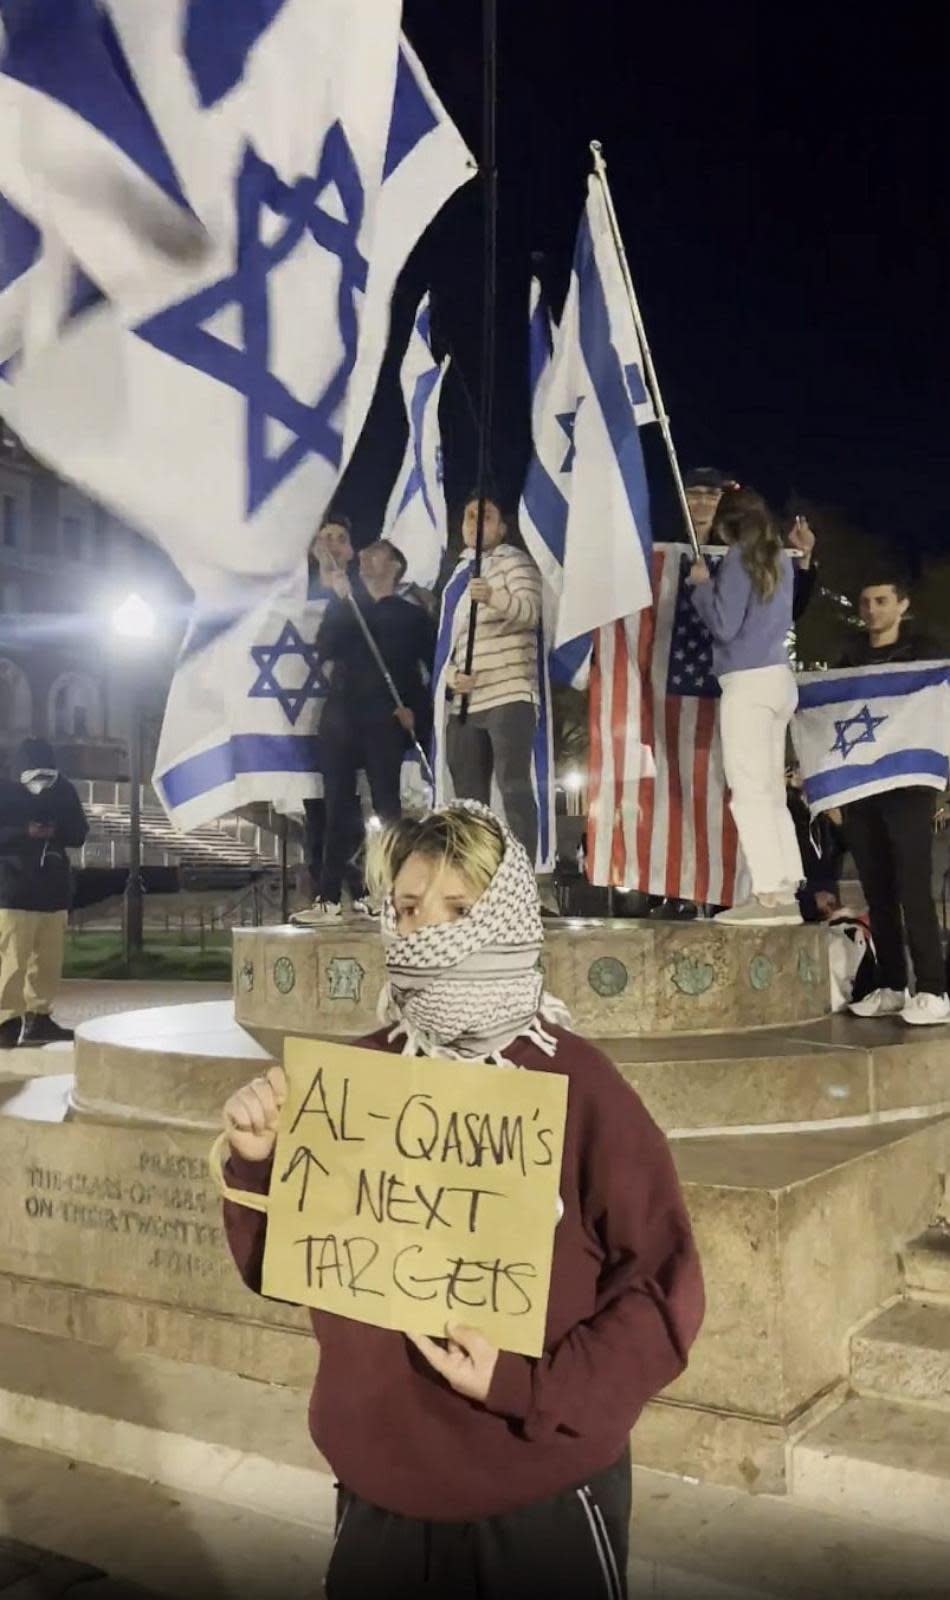 PHOTO: At the Columbia University protest on April 20, 2024, a person holds up an Al-Qassam sign. It is not known whether that person is affiliated with Columbia University. Al-Qassam is the armed wing of Hamas. (Obtained by ABC News)